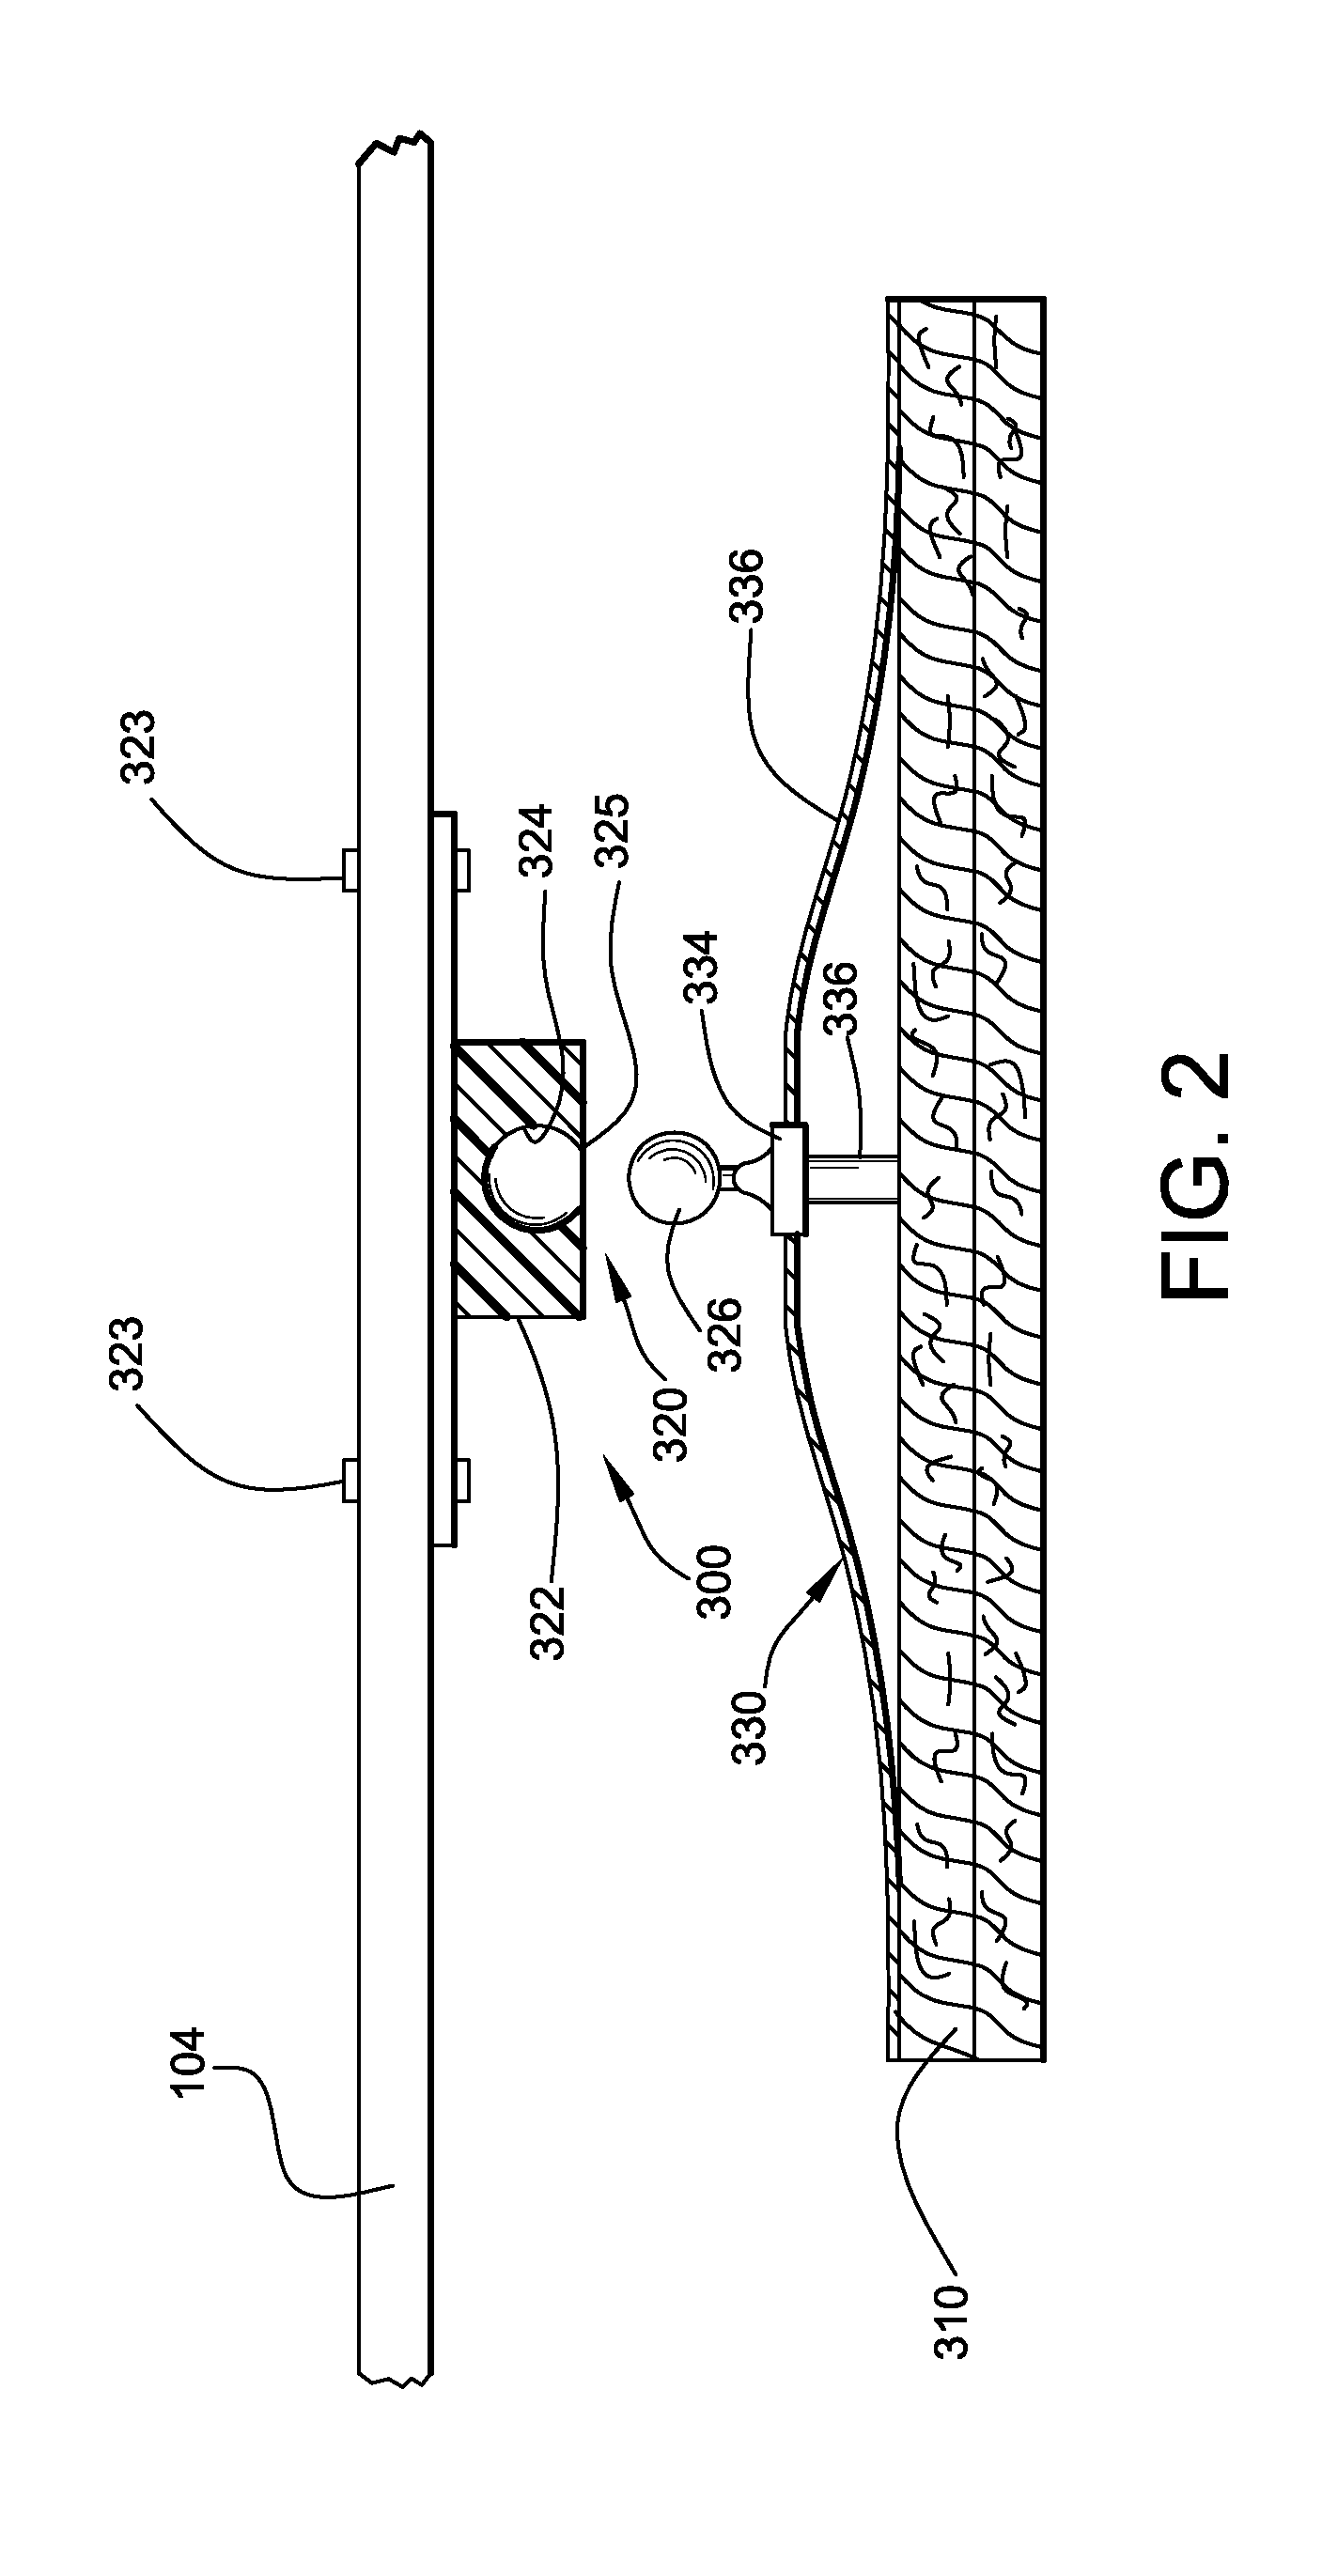 Personal equipment suspension system with active lumbar support